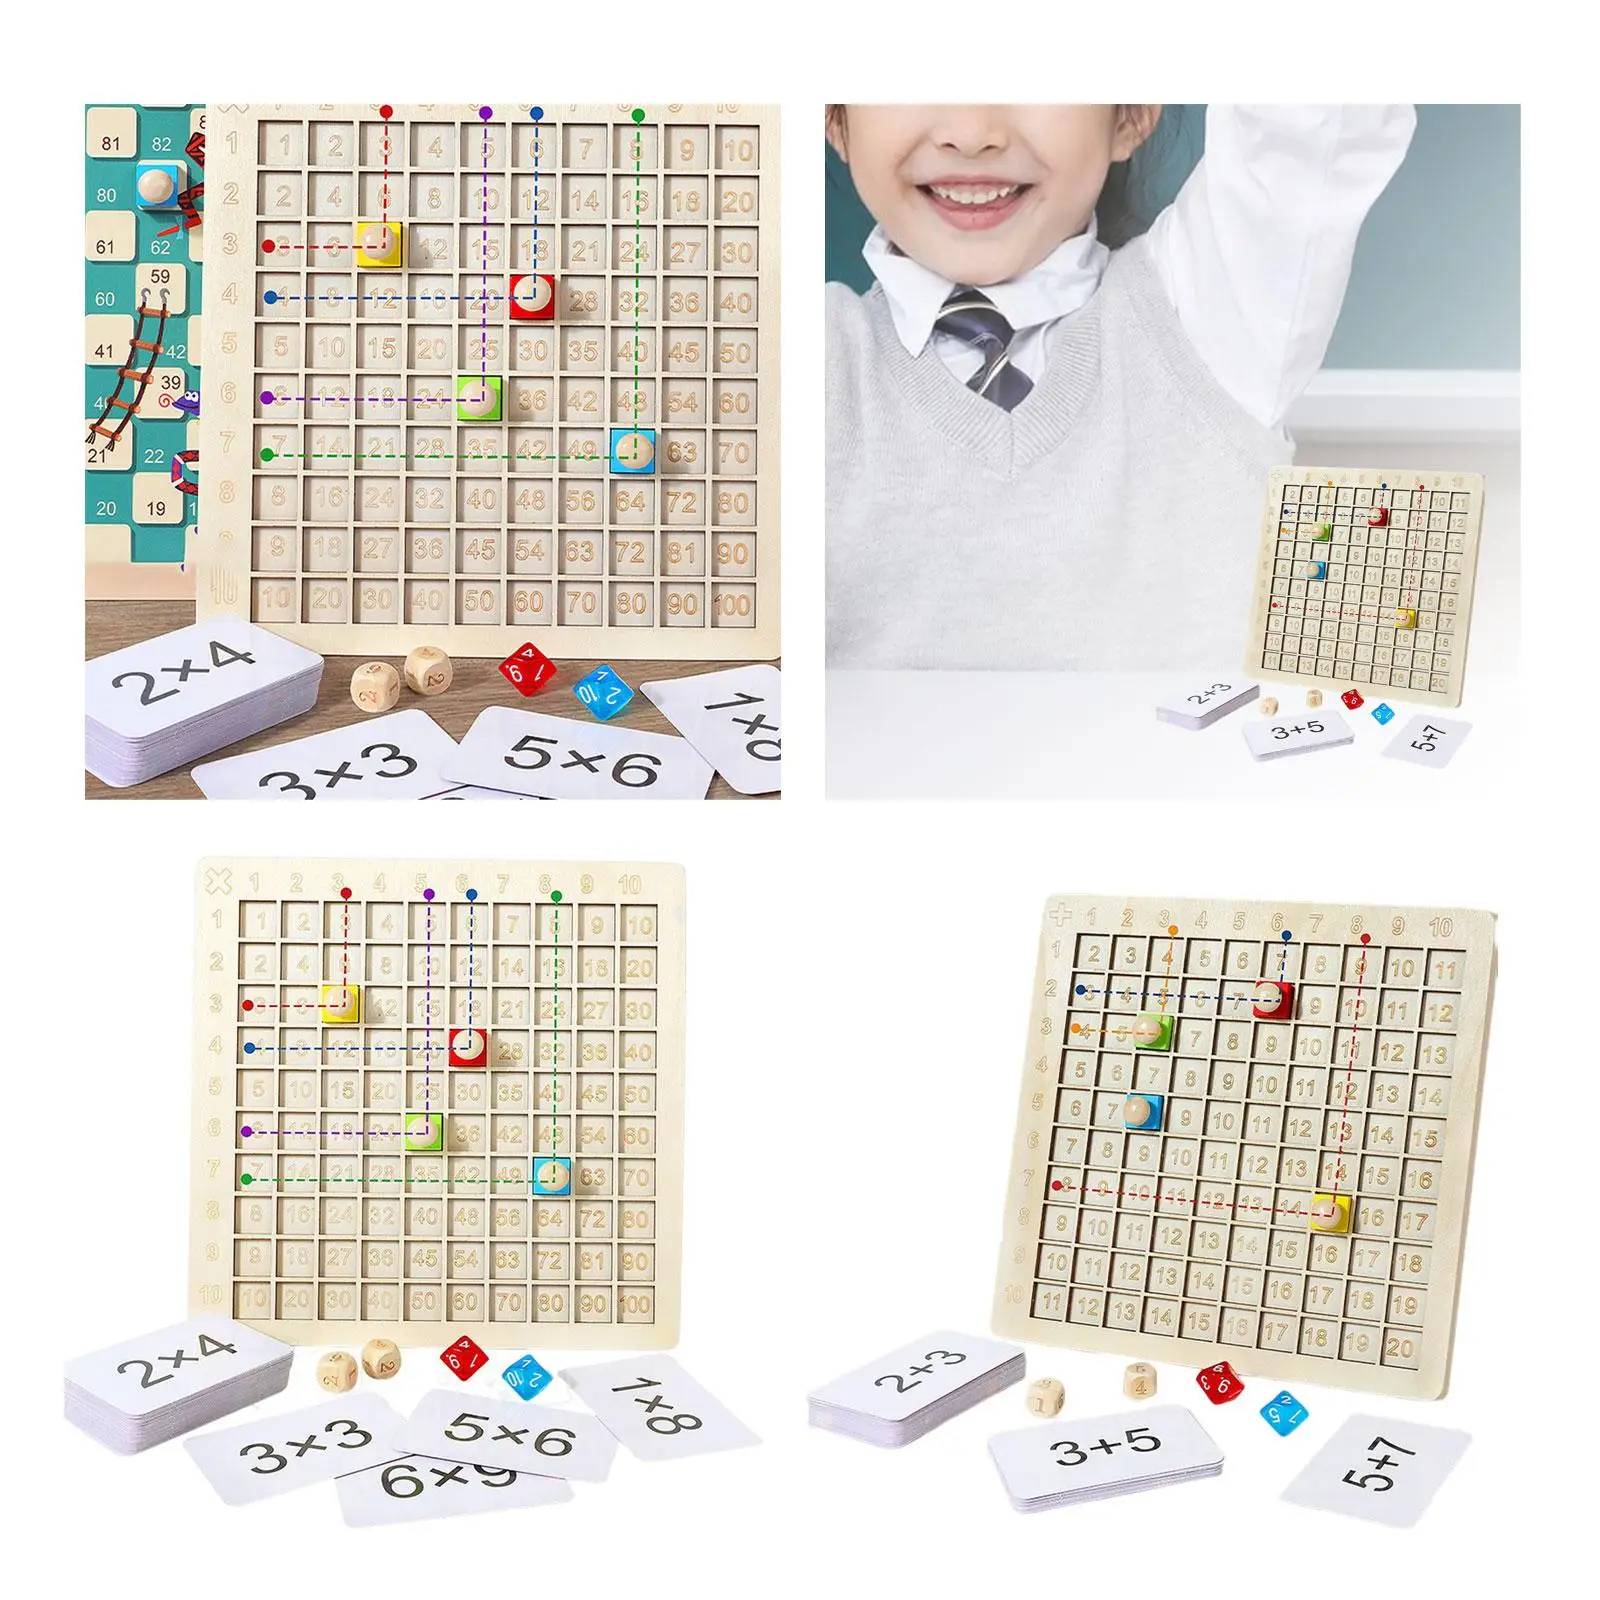 Wood Table Math Board Game Preschool Puzzle Arithmetic Teaching Aids Counting Toy Educational Learning Toys for Children